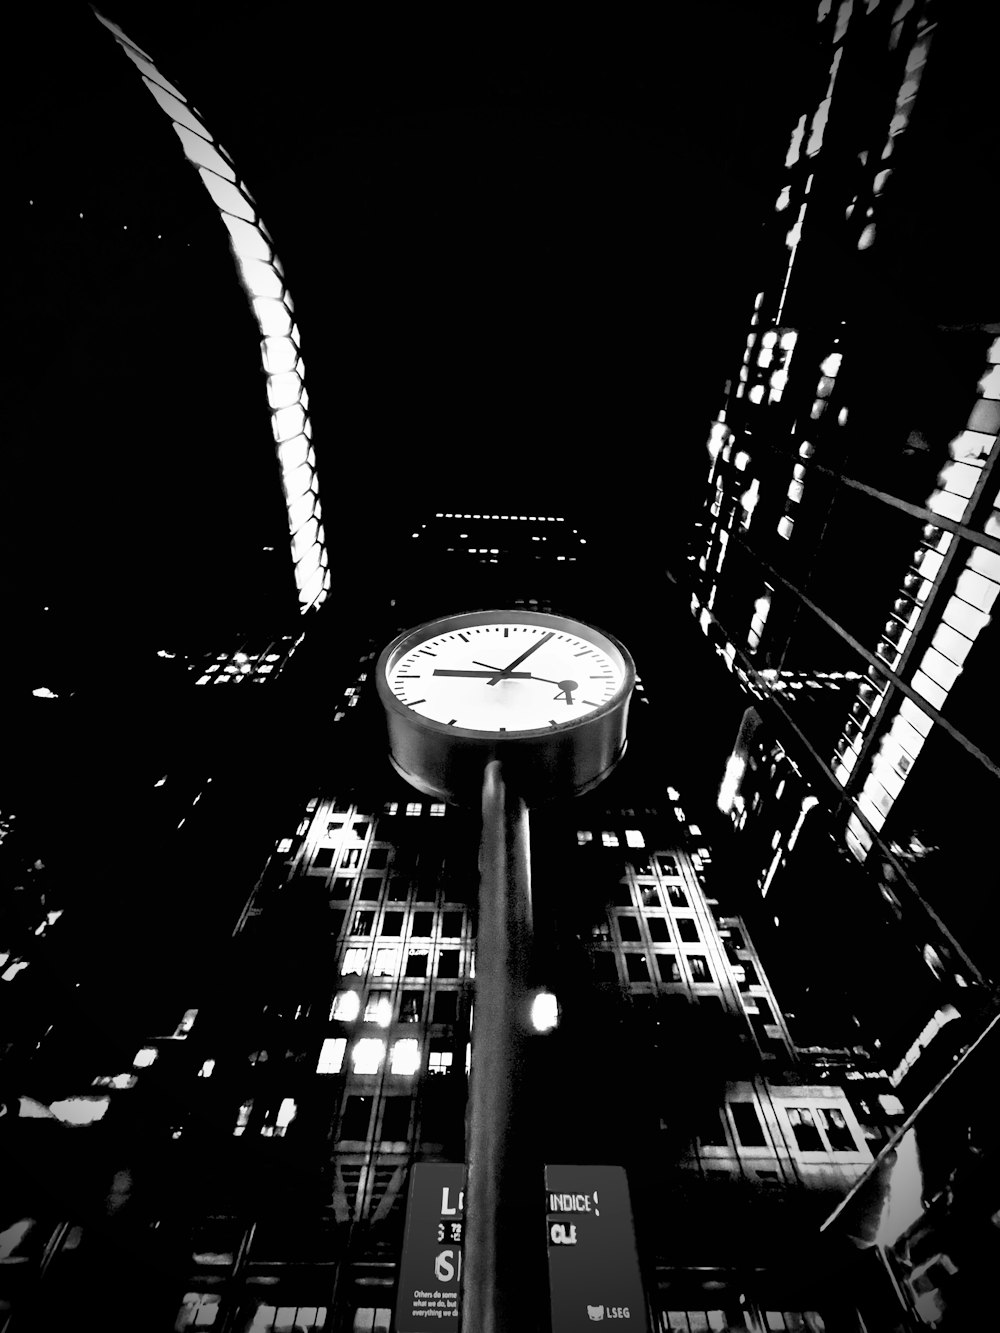 a black and white photo of a clock in the middle of a city